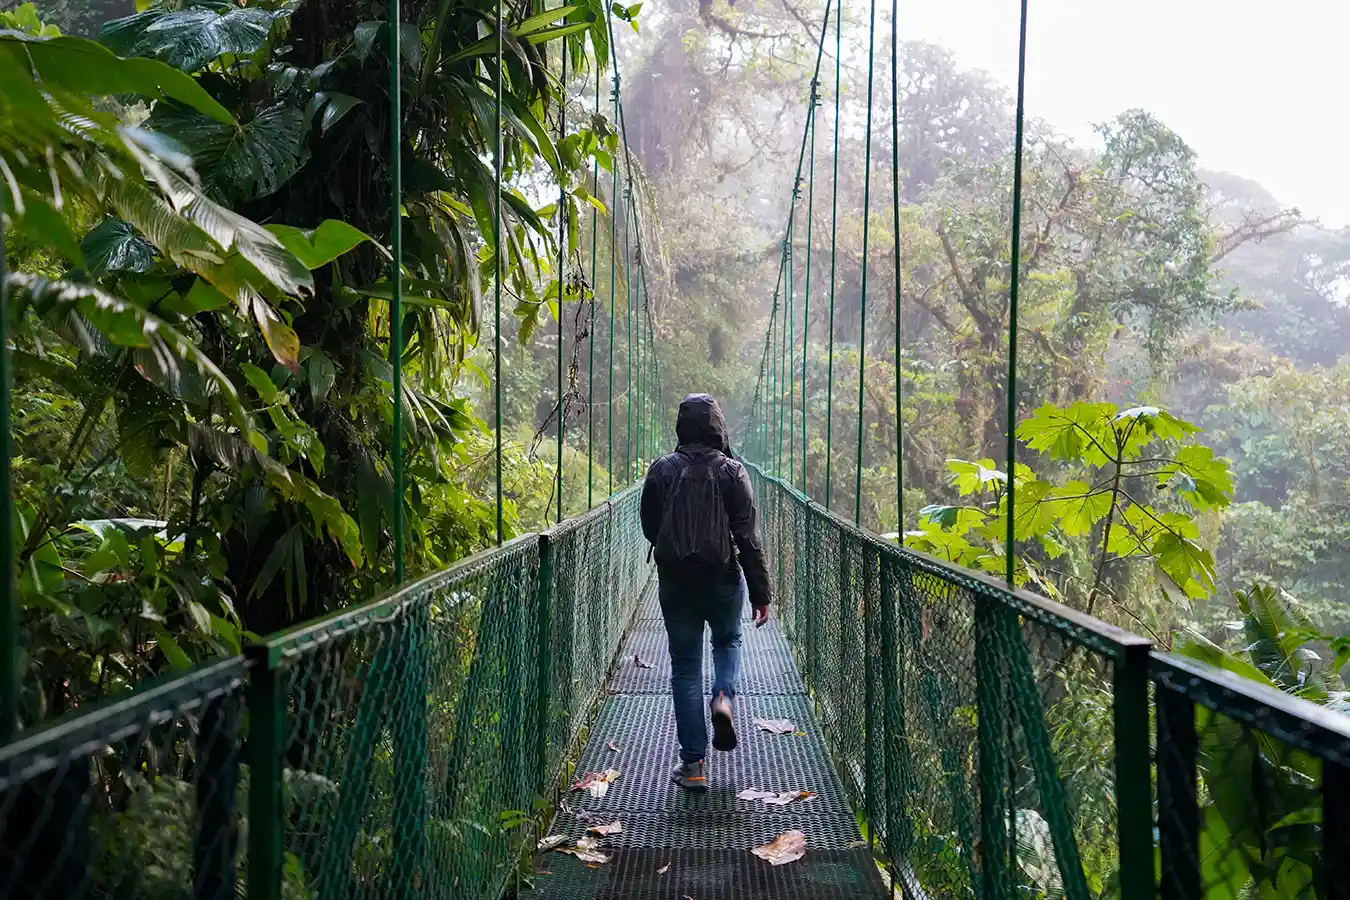 A person in a black jacket walks away from the camera on a narrow suspension bridge, surrounded by the lush greenery and mist of a cloud forest in Costa Rica. The dense foliage on either side and the misty background convey a sense of adventure and exploration in this serene natural landscape.